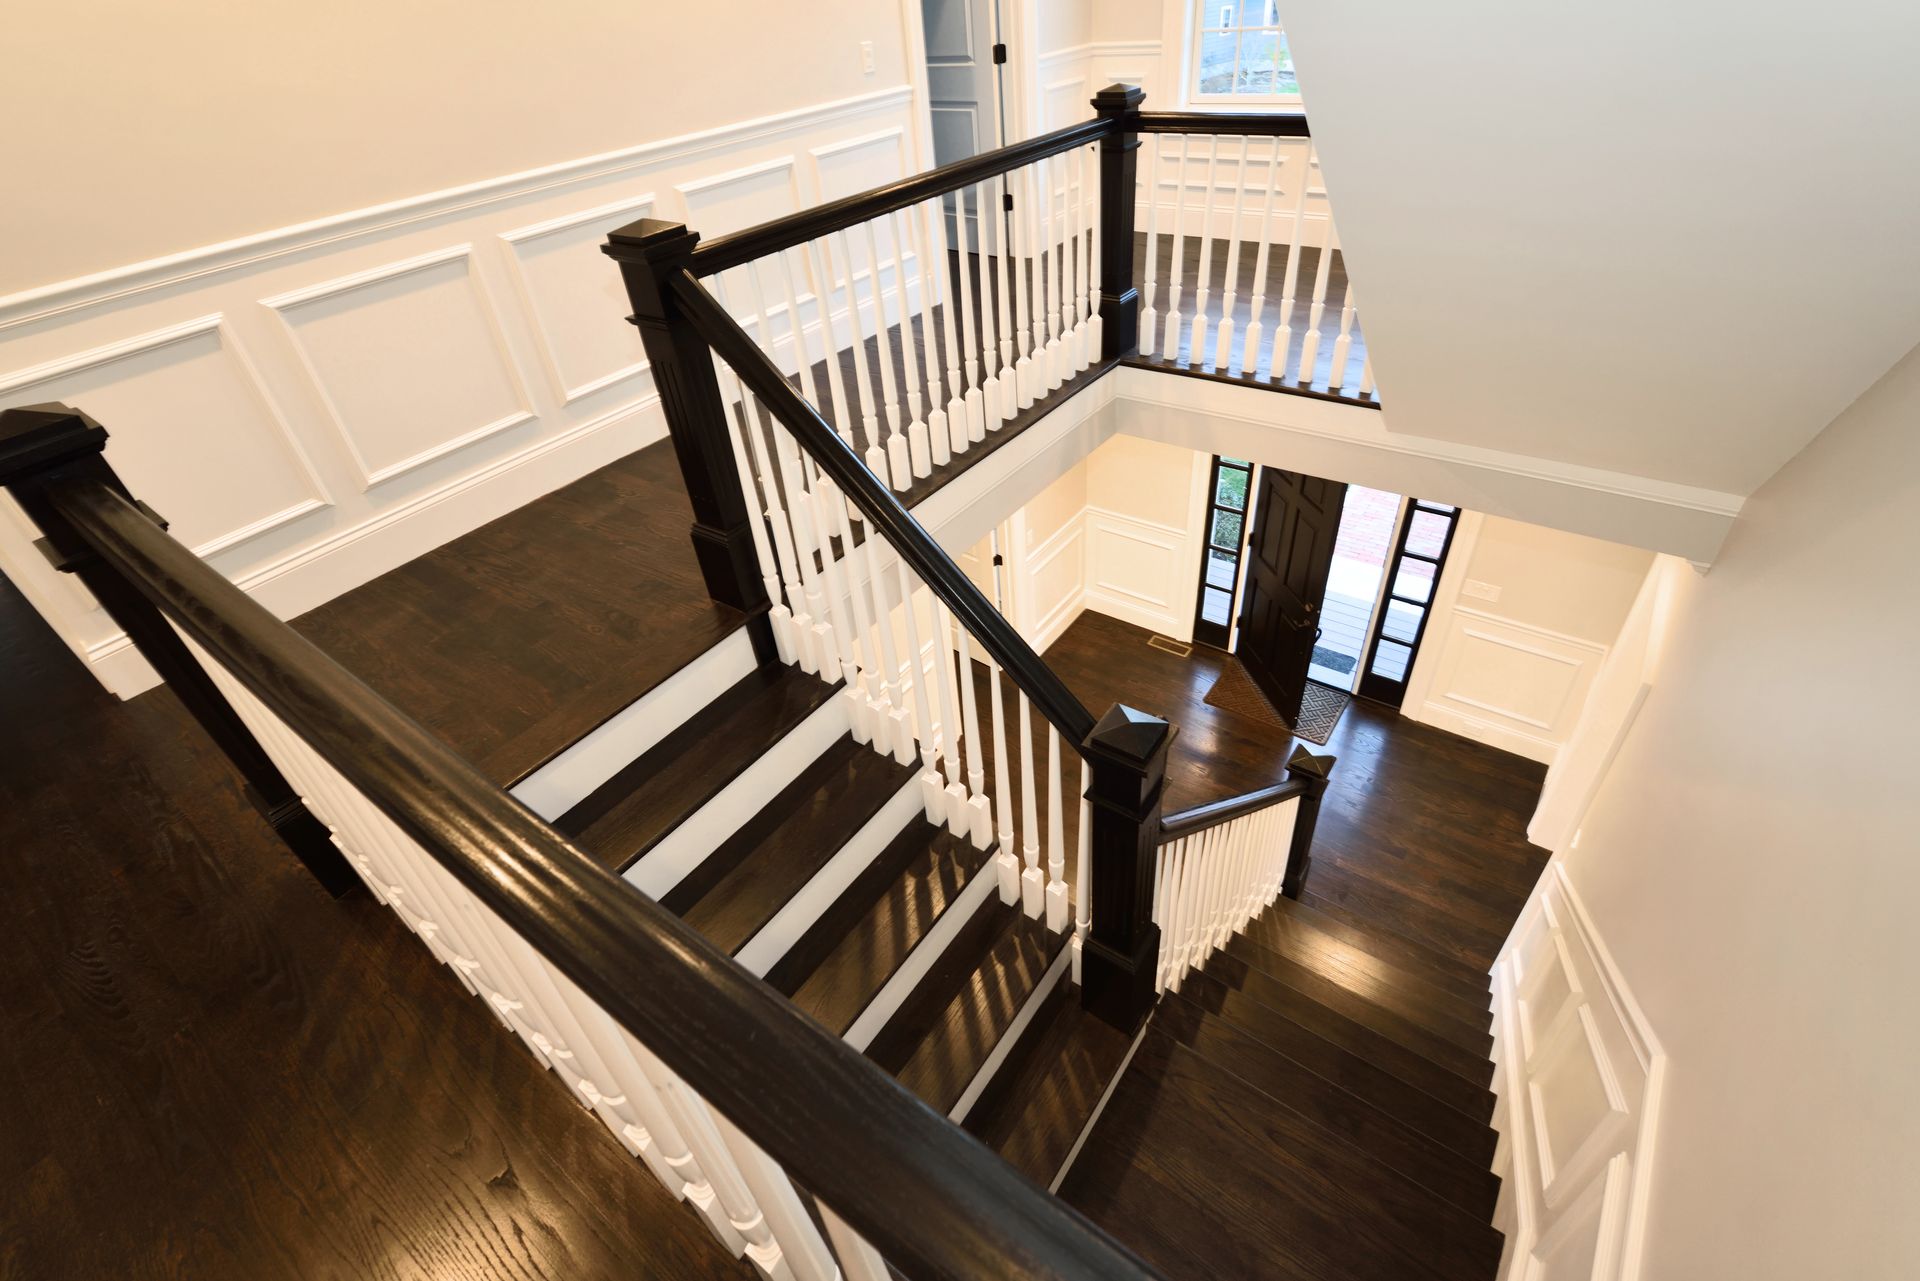 Interior staircase in new home.